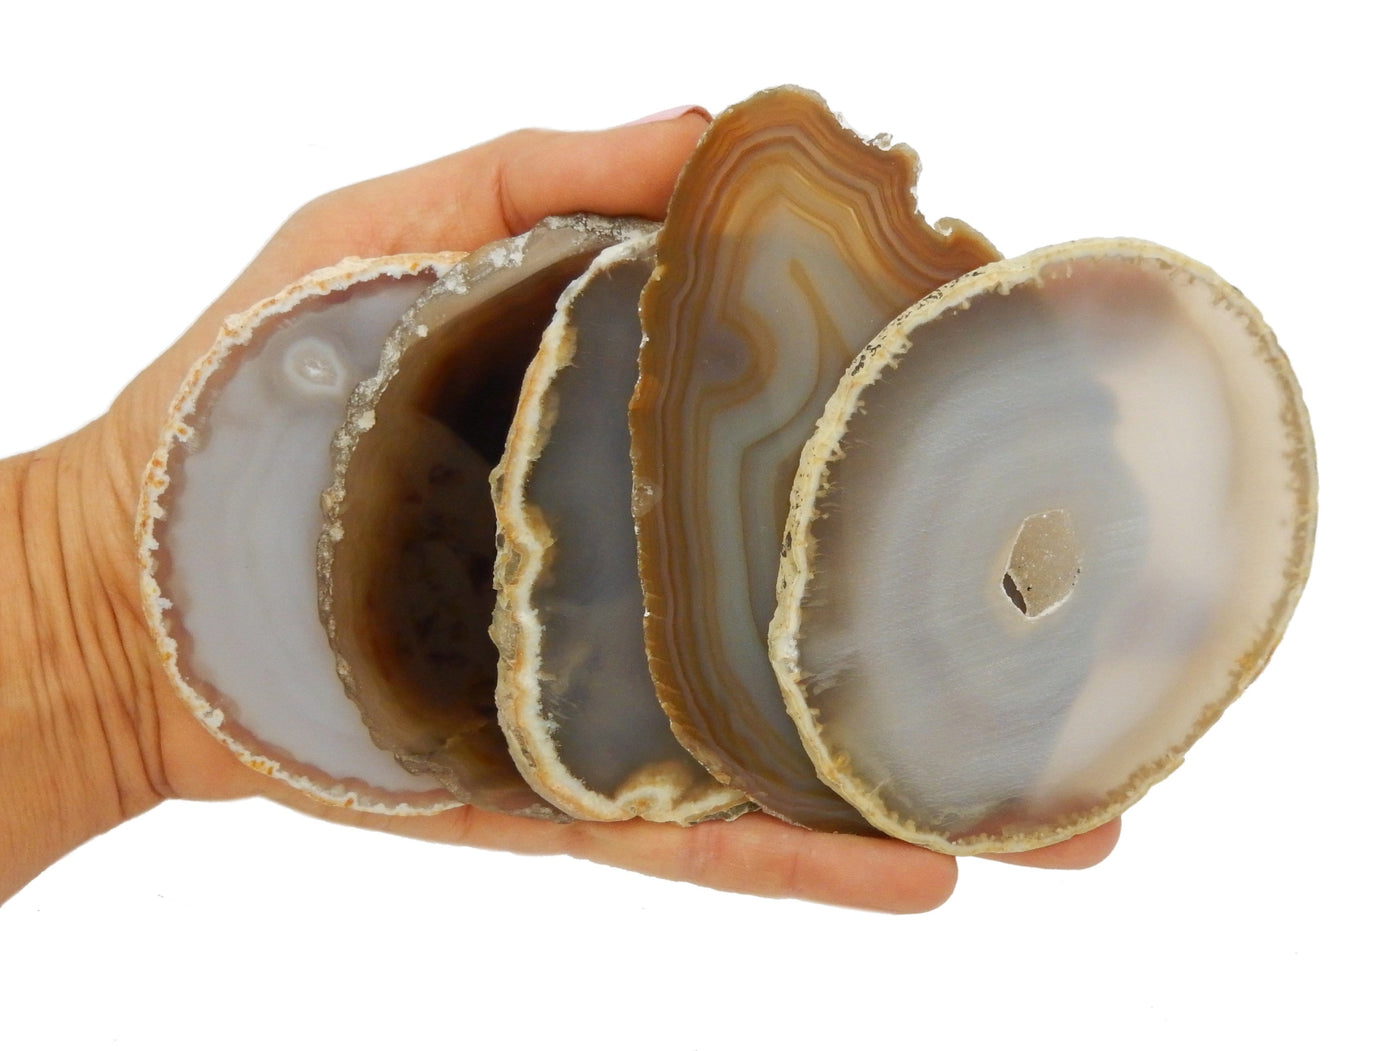  Natural Agate Slices in a hand